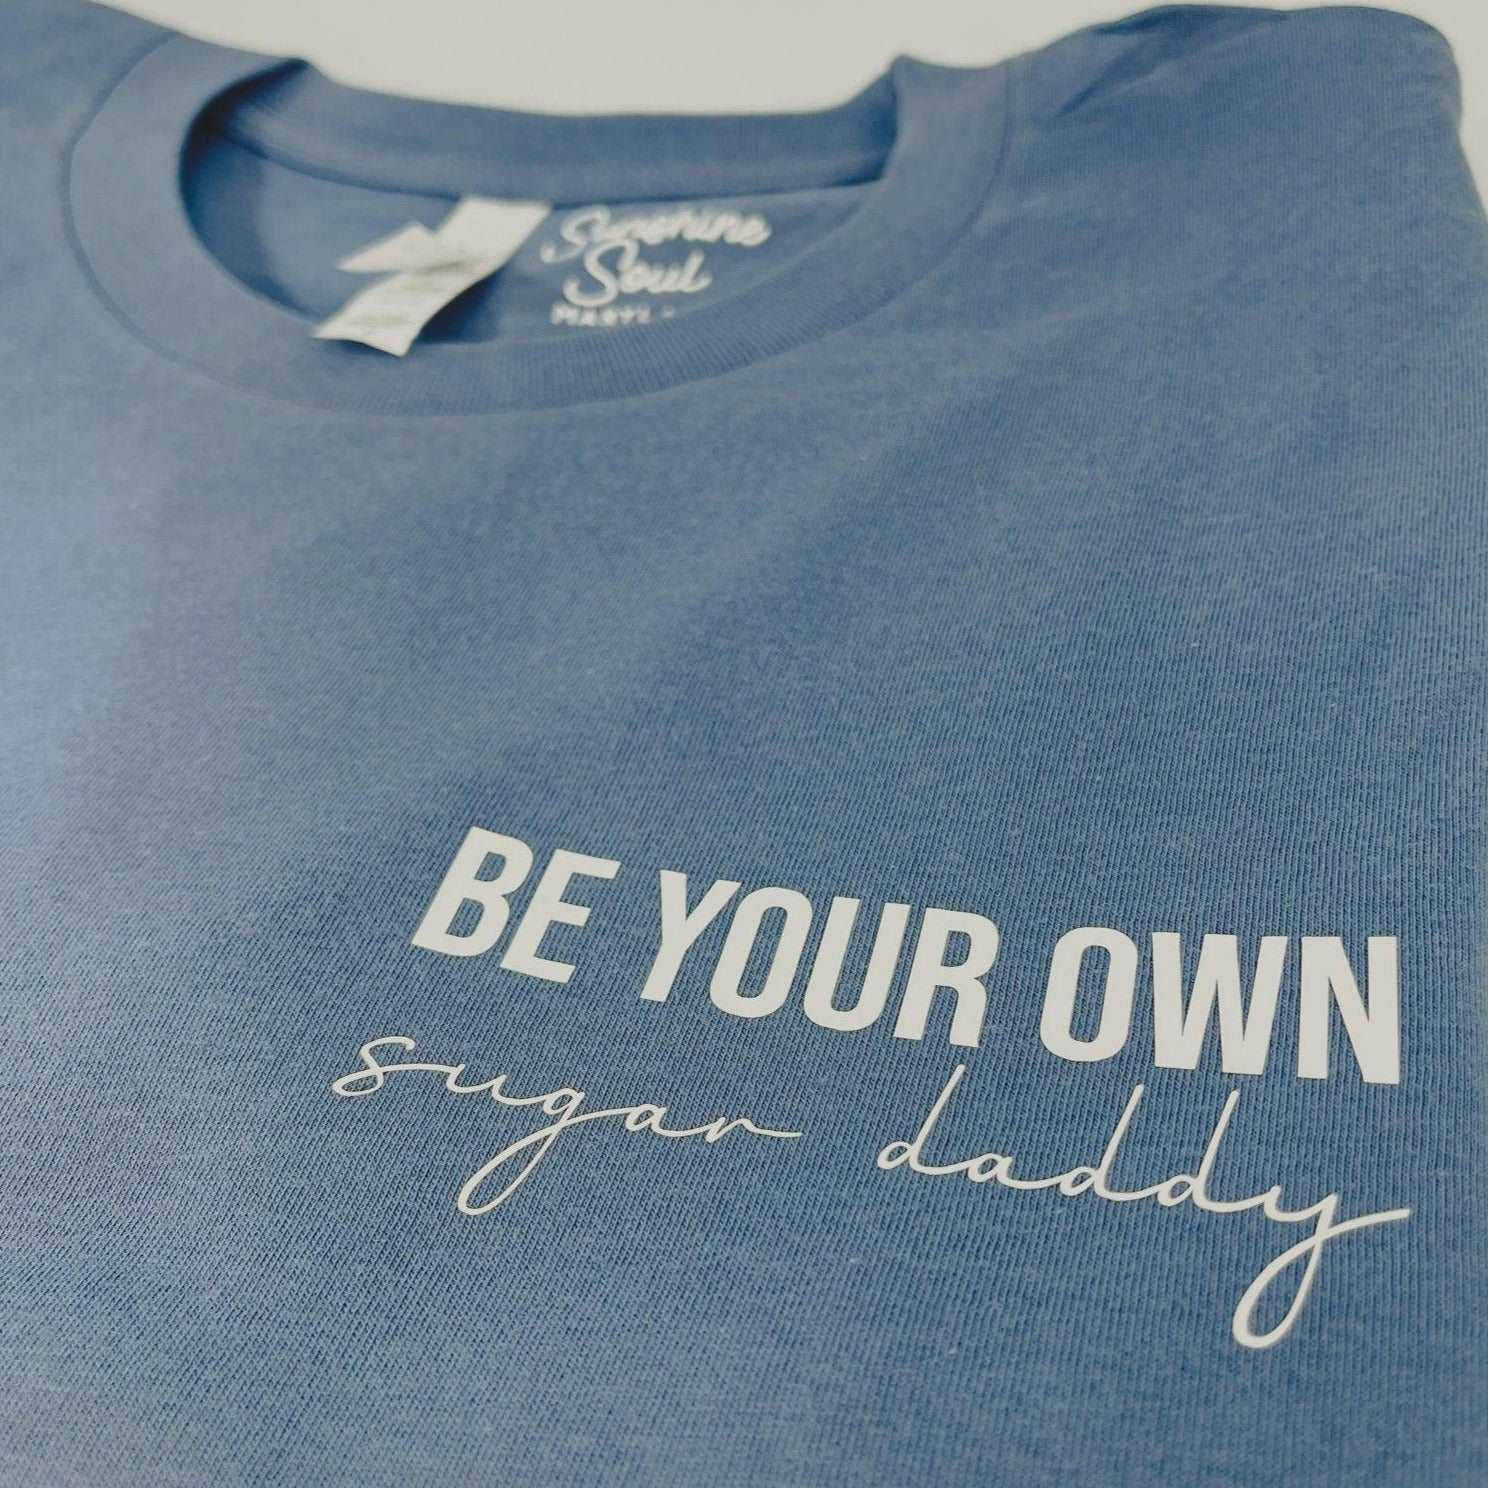 Be Your Own Sugar Daddy T-Shirt - Sunshine Soul MD